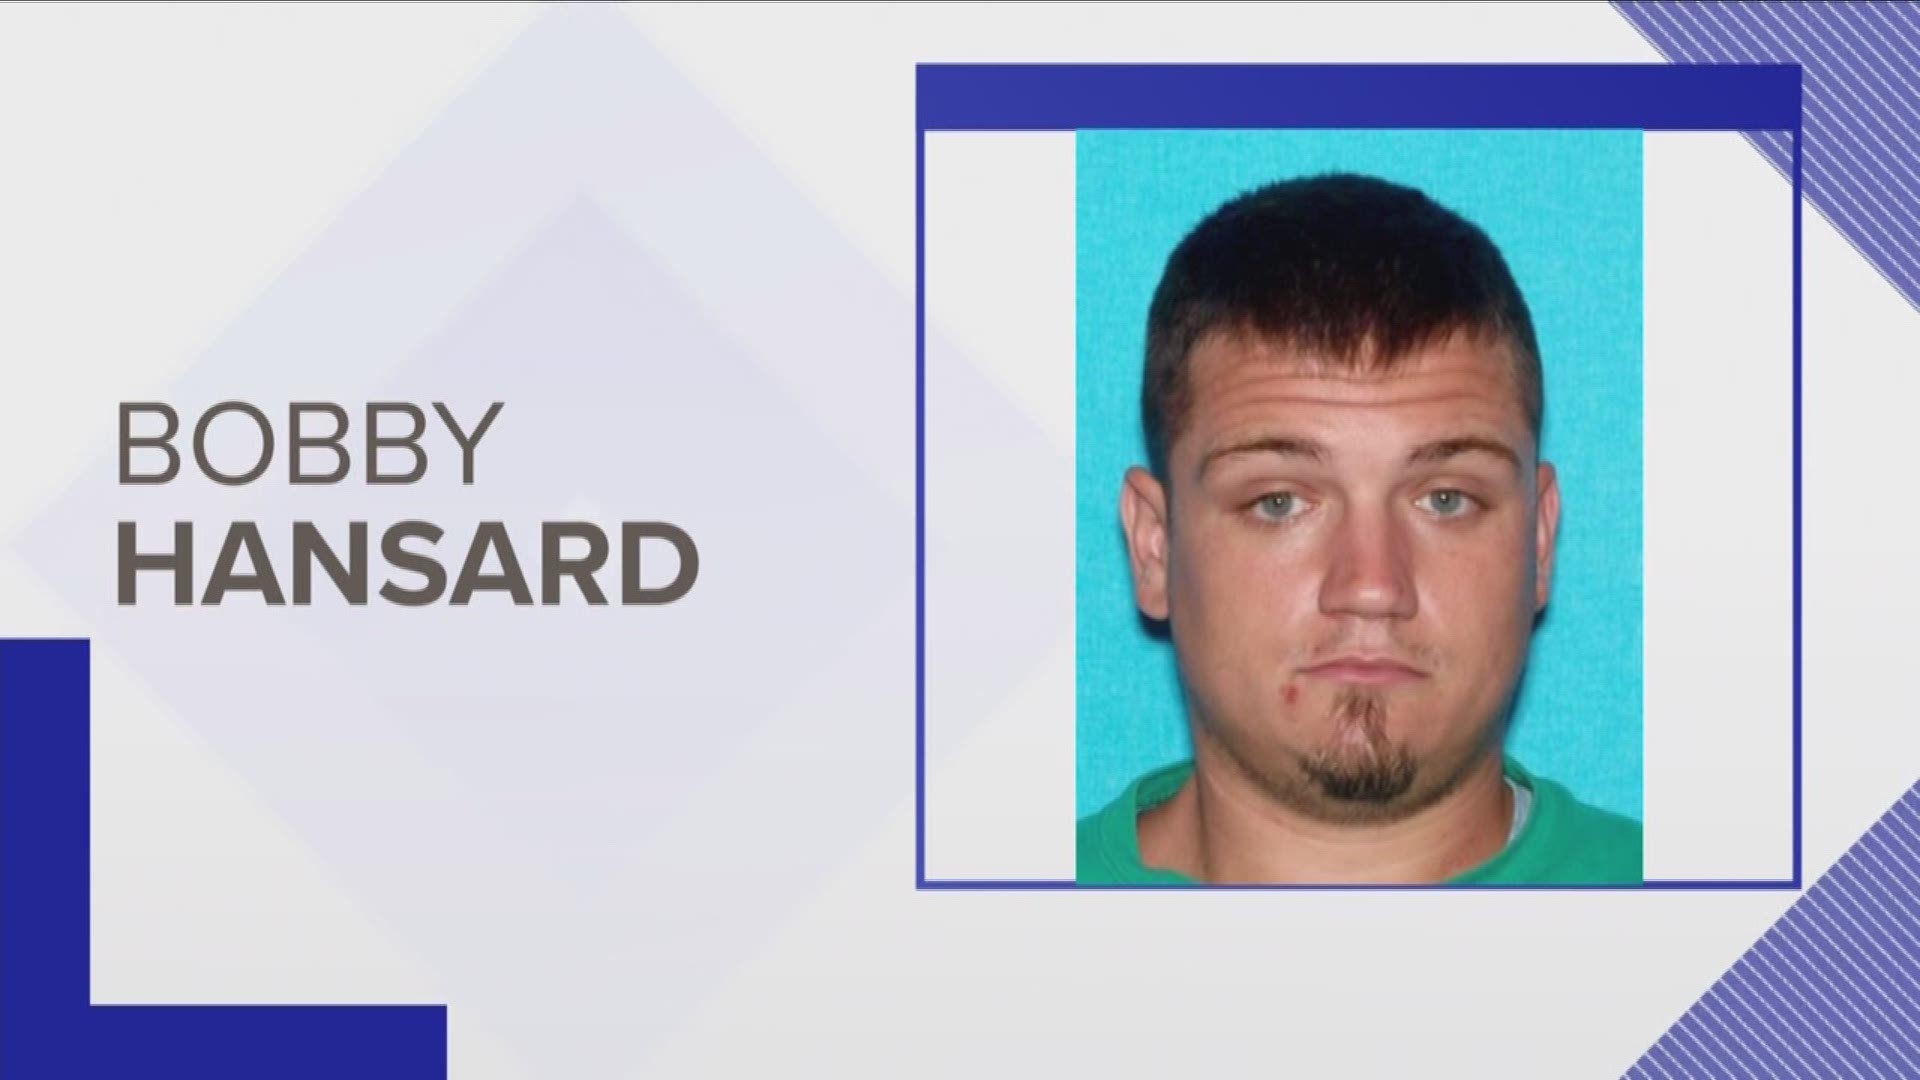 KCSO says they have located the 4-door, maroon sedan and another suspect in the case, but the search continues for the main suspect -- Bobby Hansard.